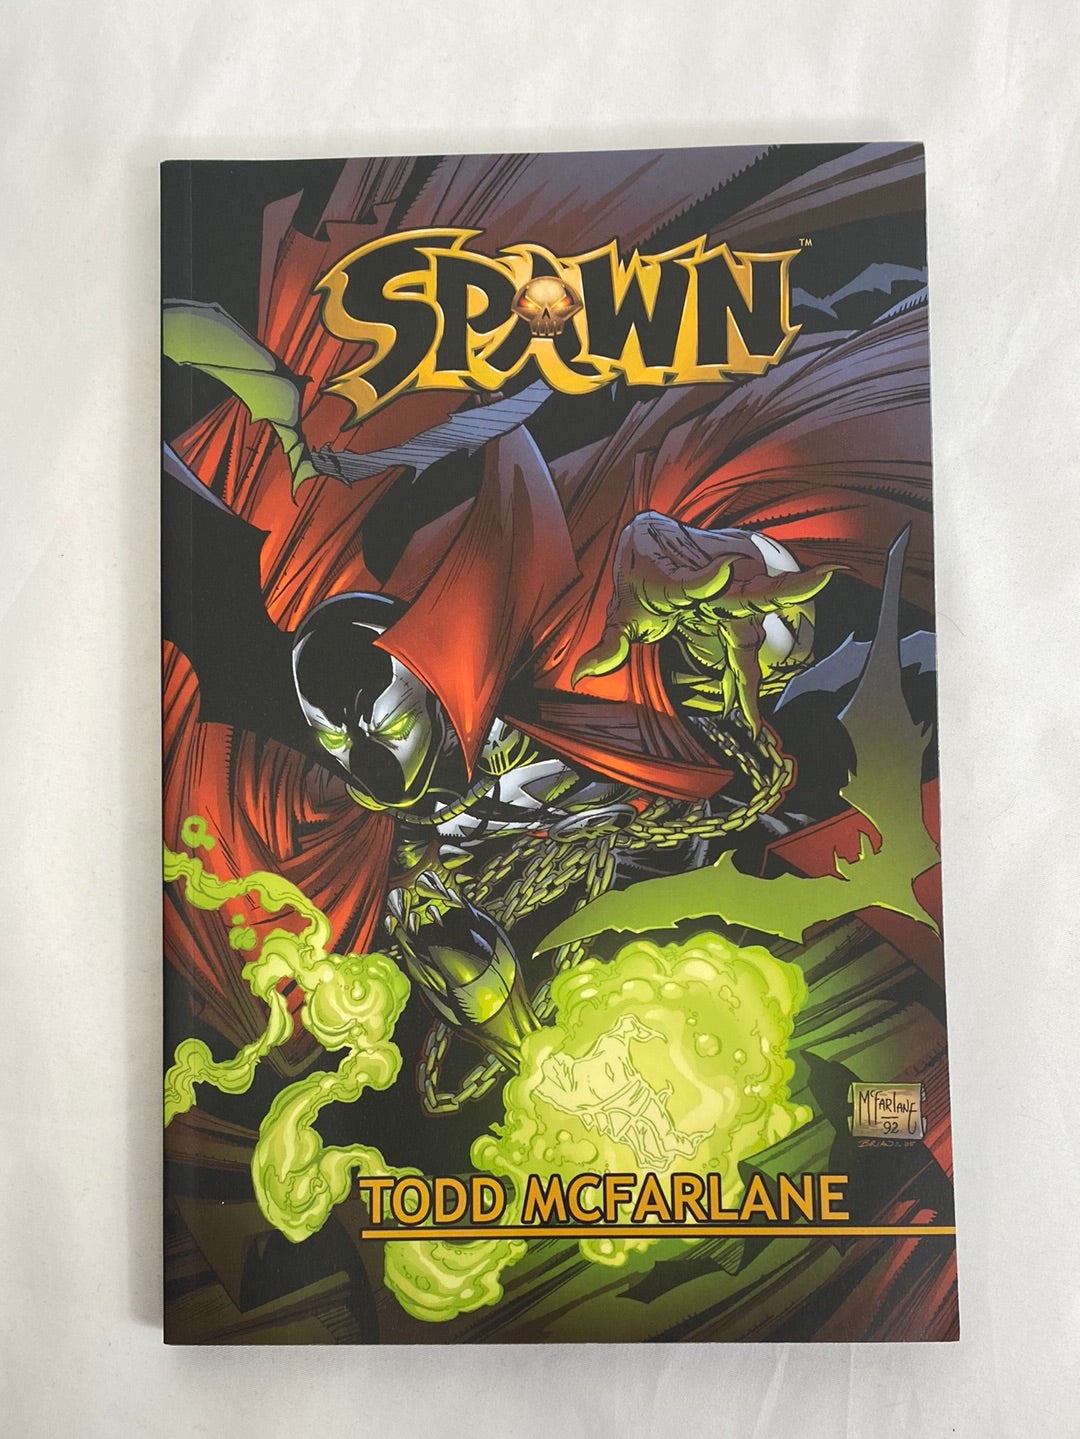 Spawn Collection Vol.1 by Todd McFarlane